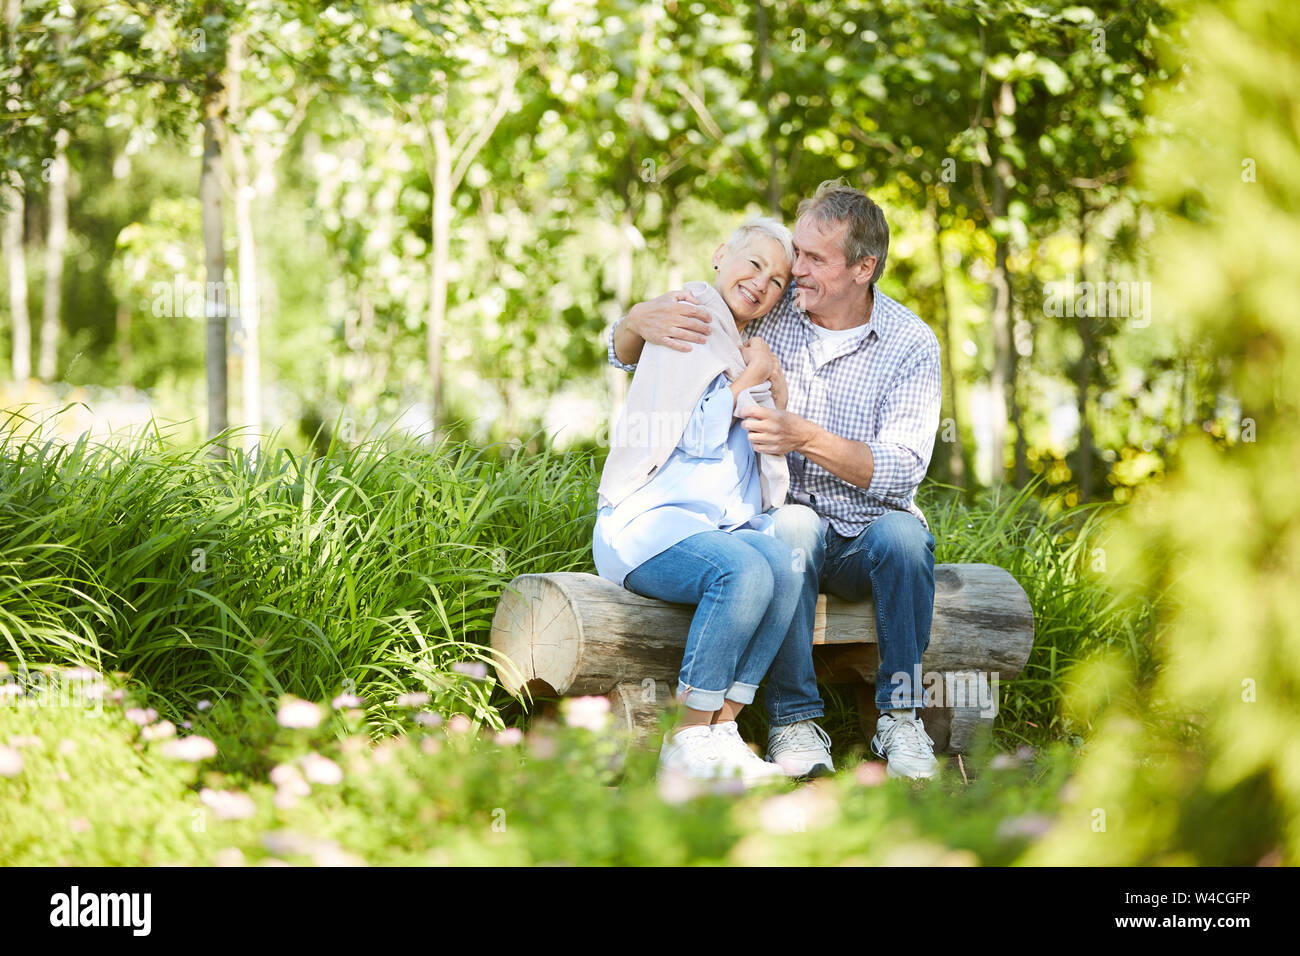 Full length portrait of loving senior couple embracing playfully while enjoying date in Summer park, copy space Stock Photo